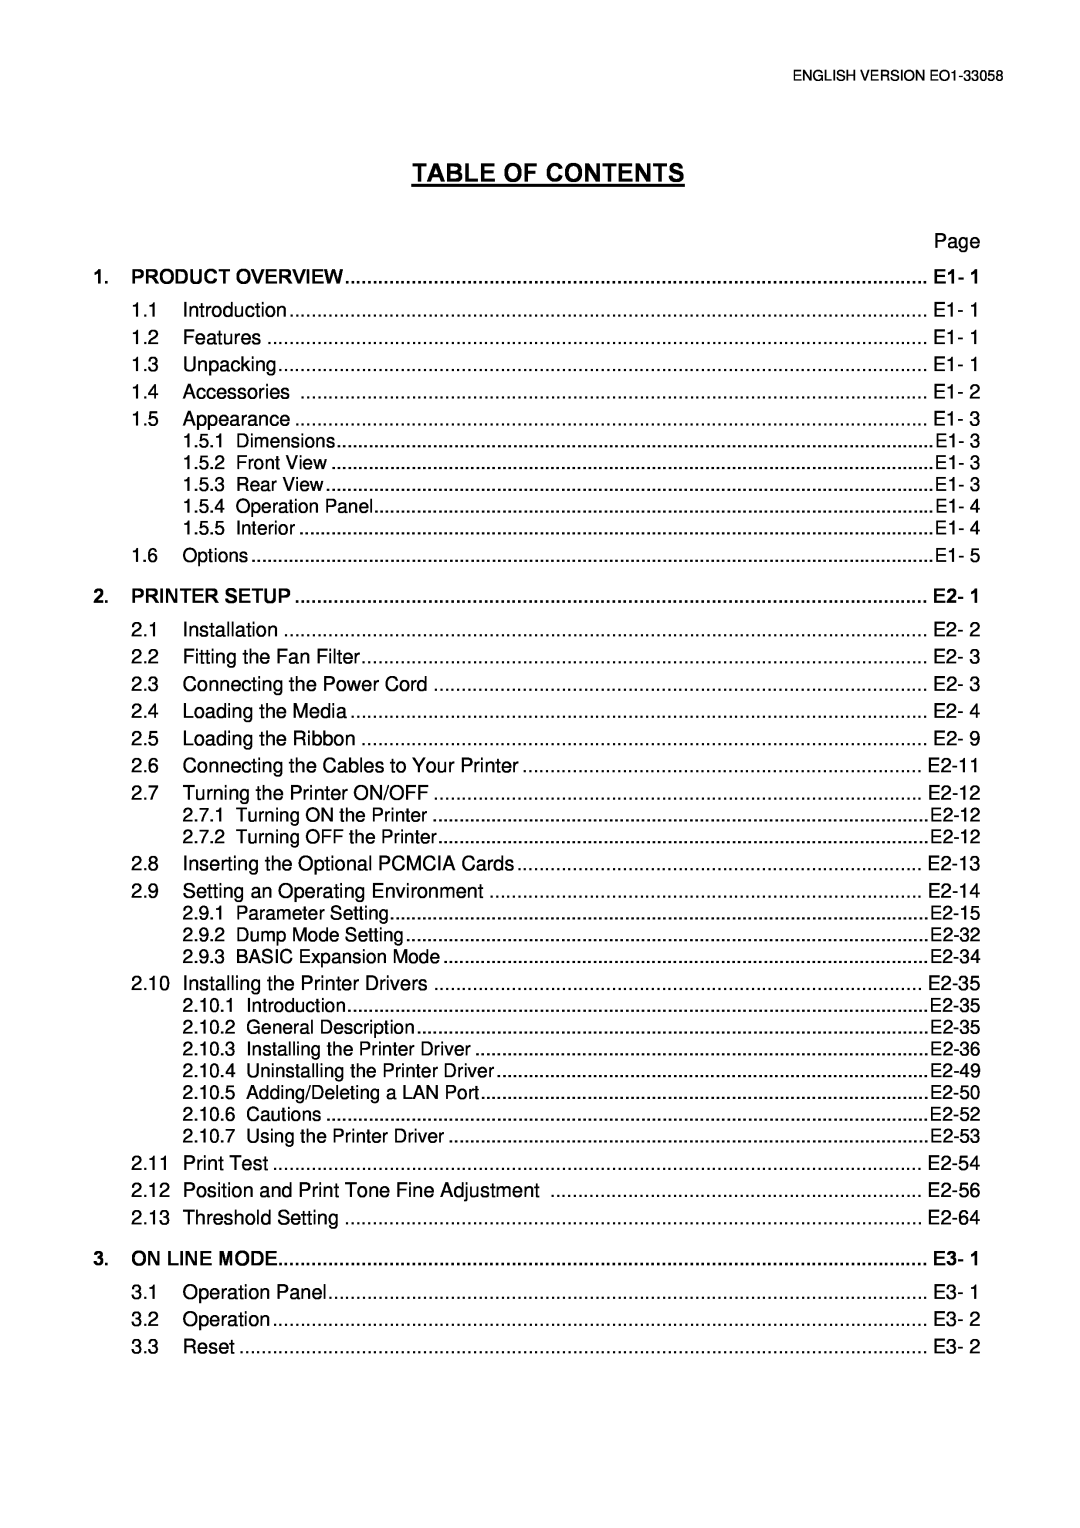 Toshiba B-SX4T owner manual Table Of Contents, Product Overview, Printer Setup, On Line Mode 